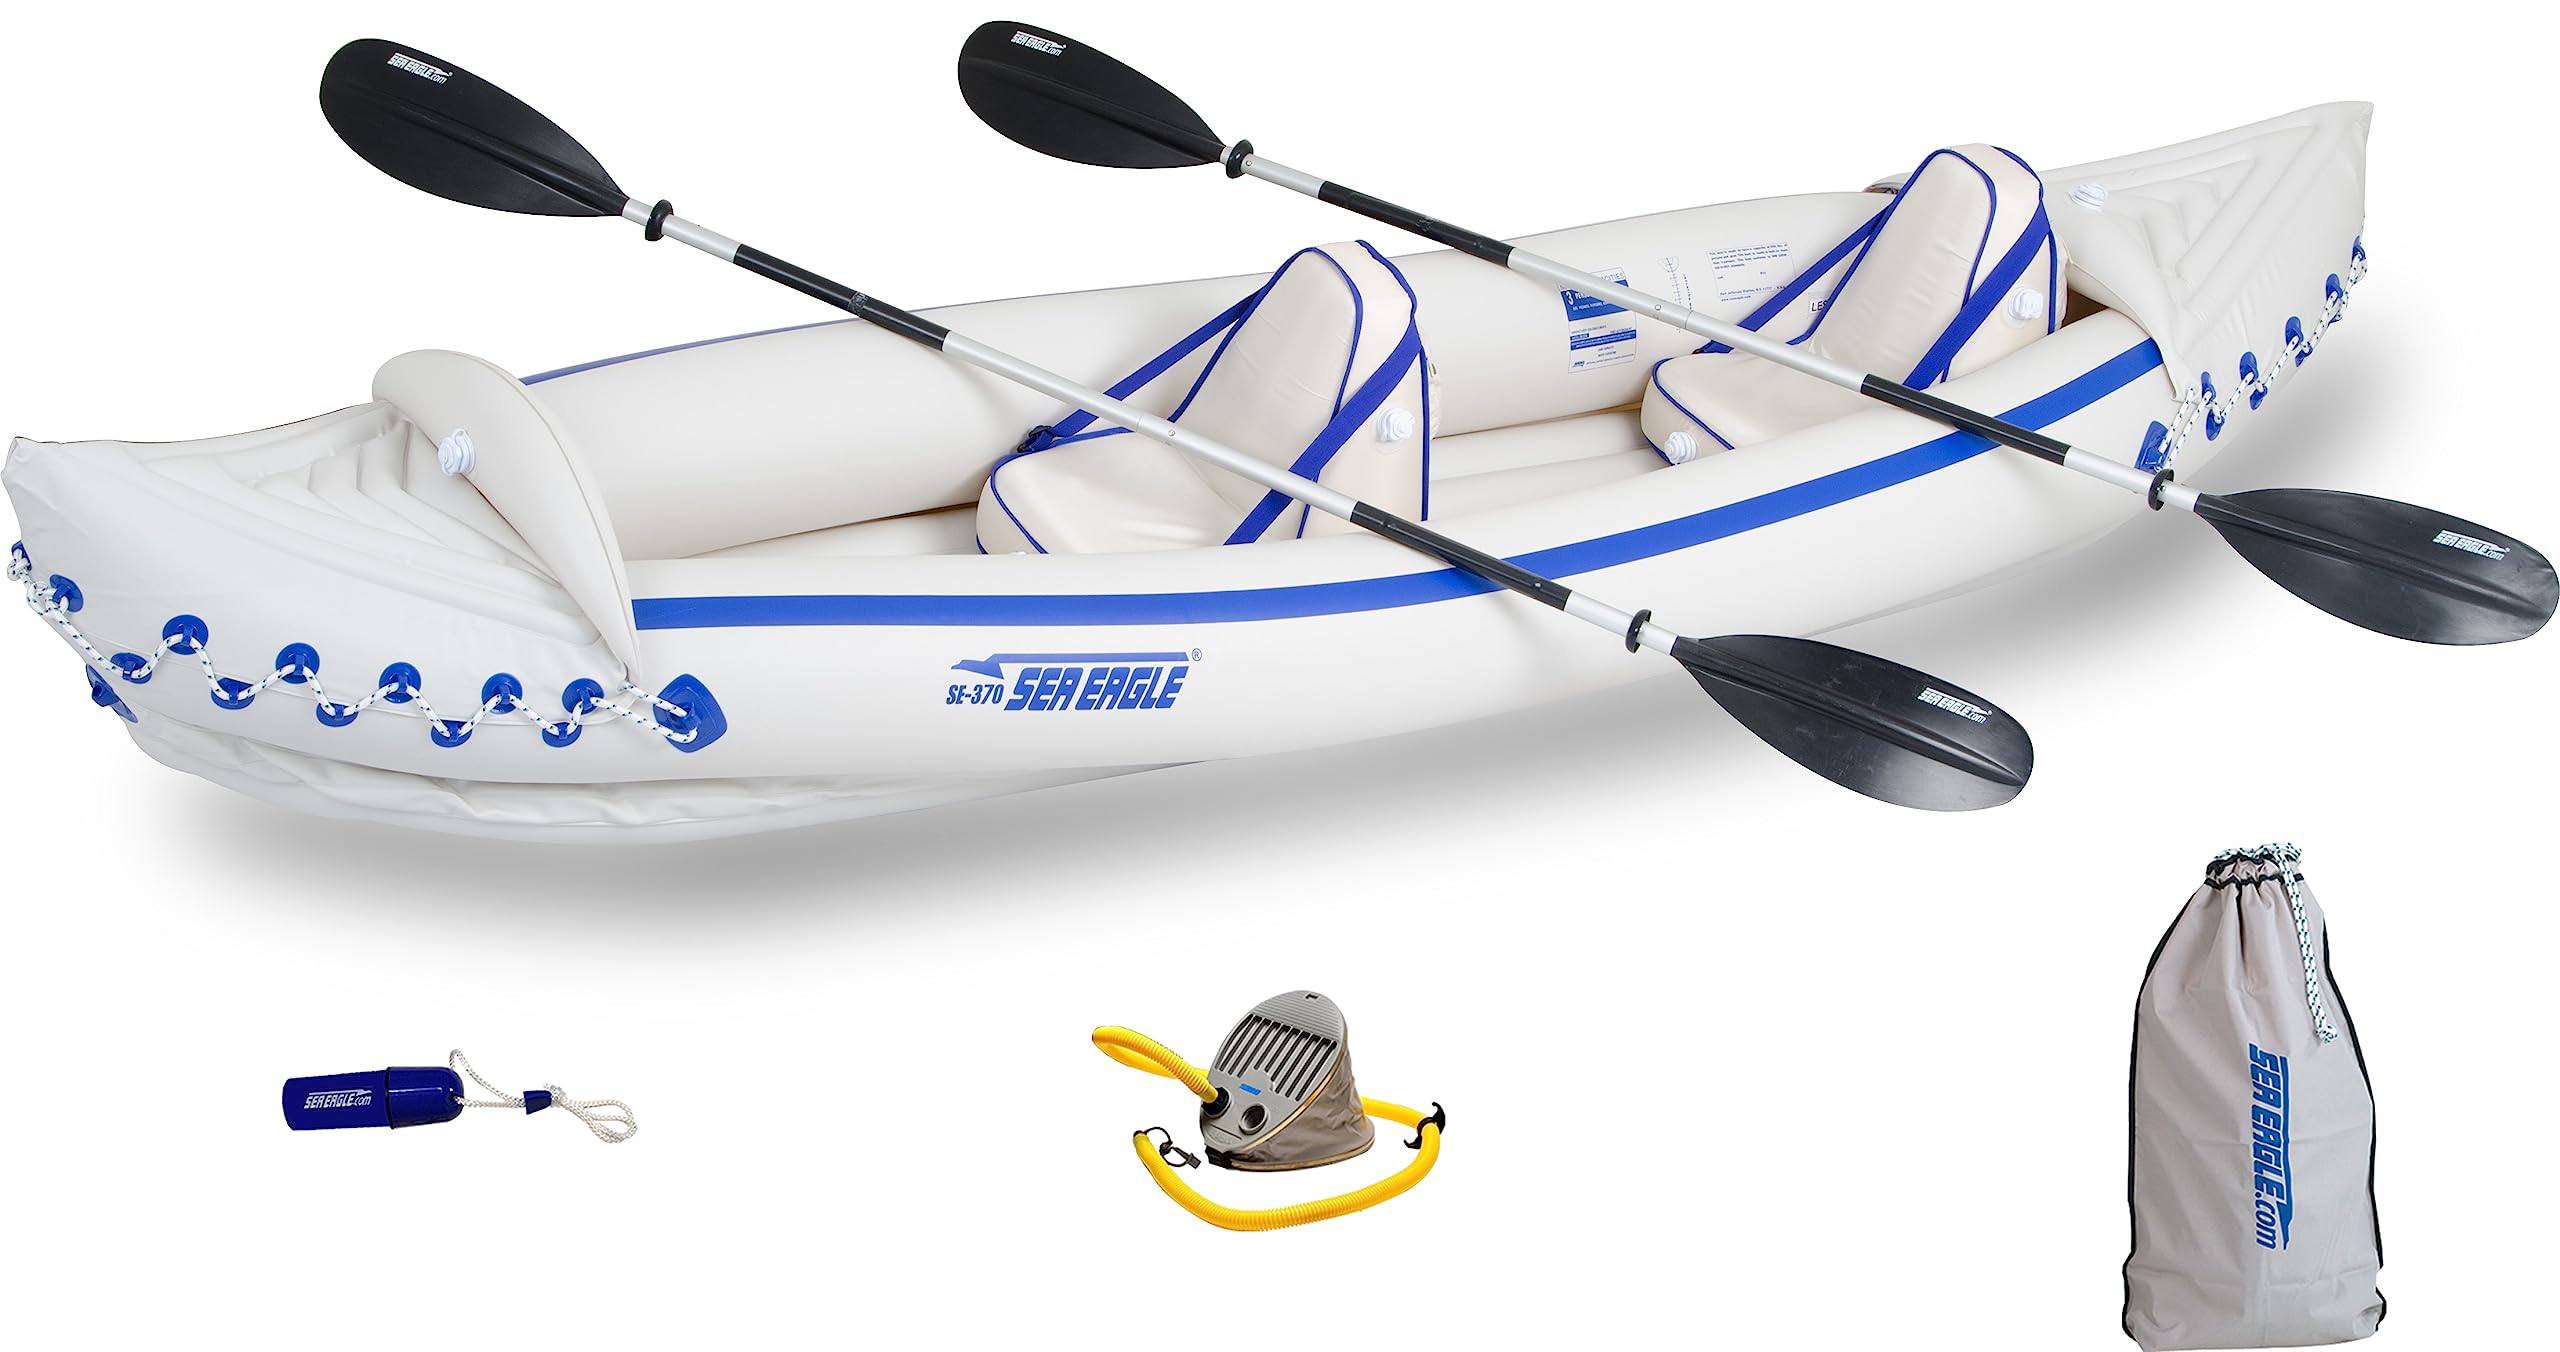 Sea Eagle 370K Pro 3-Person Inflatable Outdoor Water Sports Kayak Canoe Boat with Paddles, Adjustable Seats, Foot Pump, and Carrying Bag, White